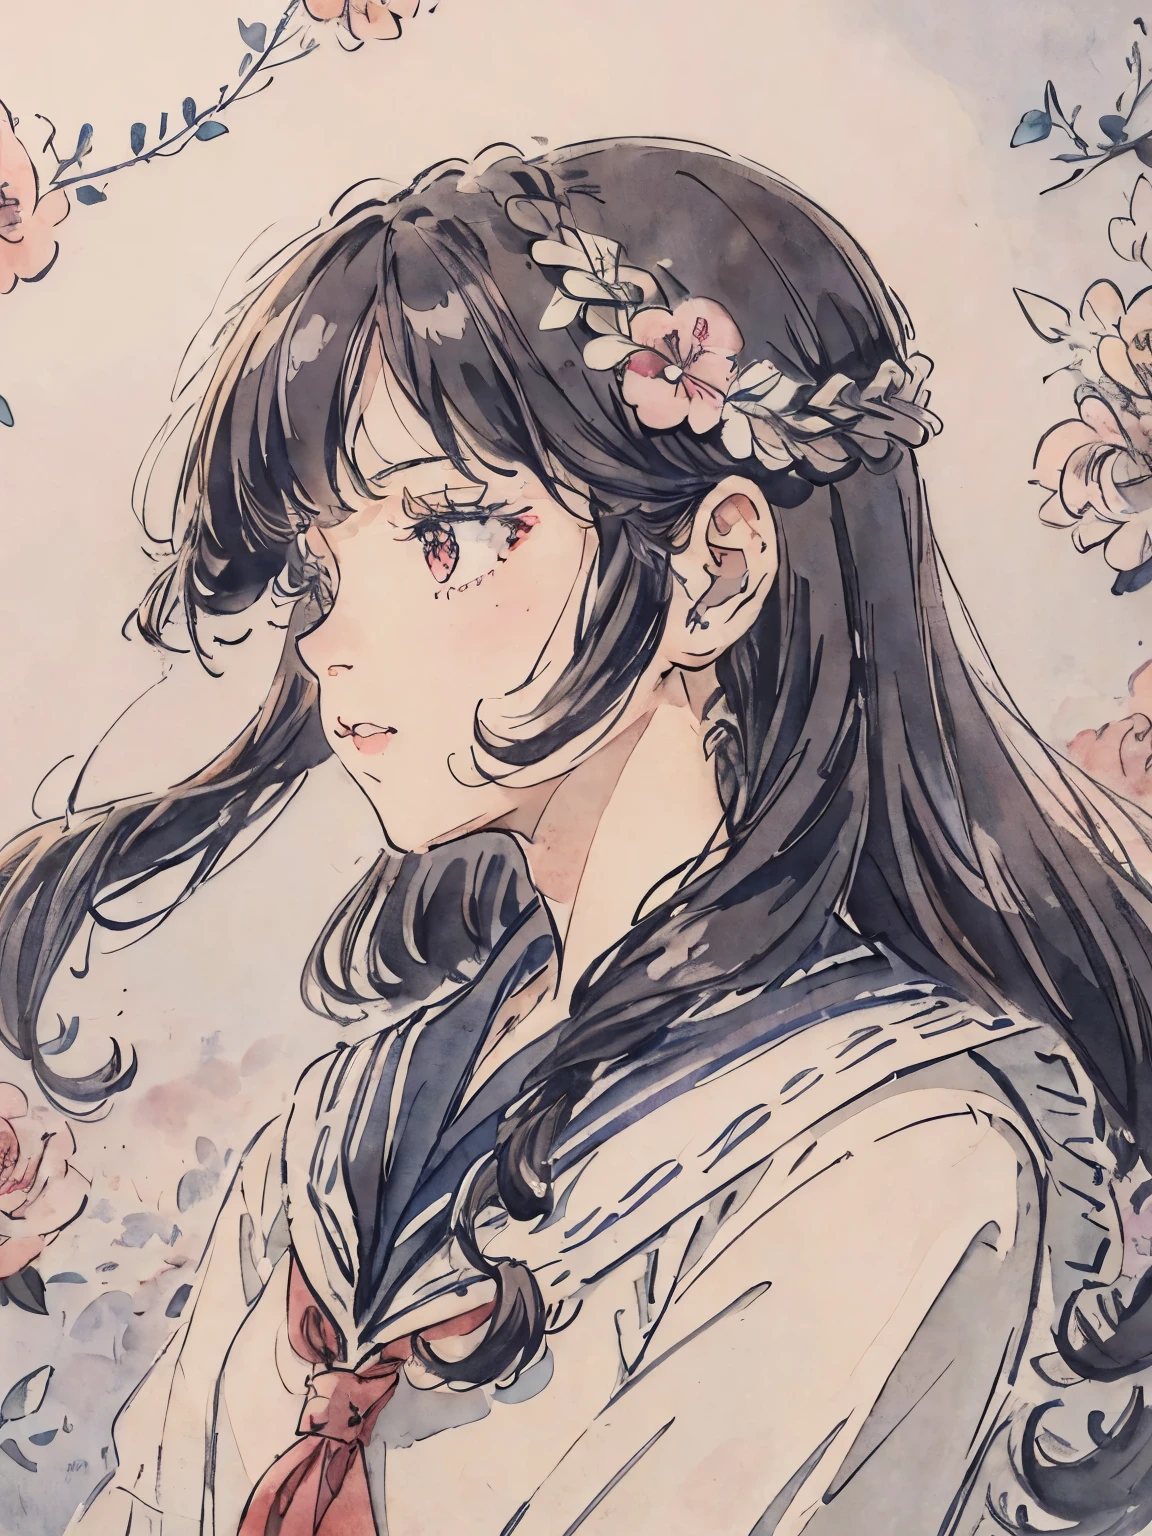 sailor suit、curl hair、long black hair、sailor suit、profile、Lady、flower garden、icon、soft lighting、close up of face、photo studio、hair blowing in the wind、petal、curly hair、watercolor style、Lots of flowers in the background、profile、Red camellia flowers all over the background、snow